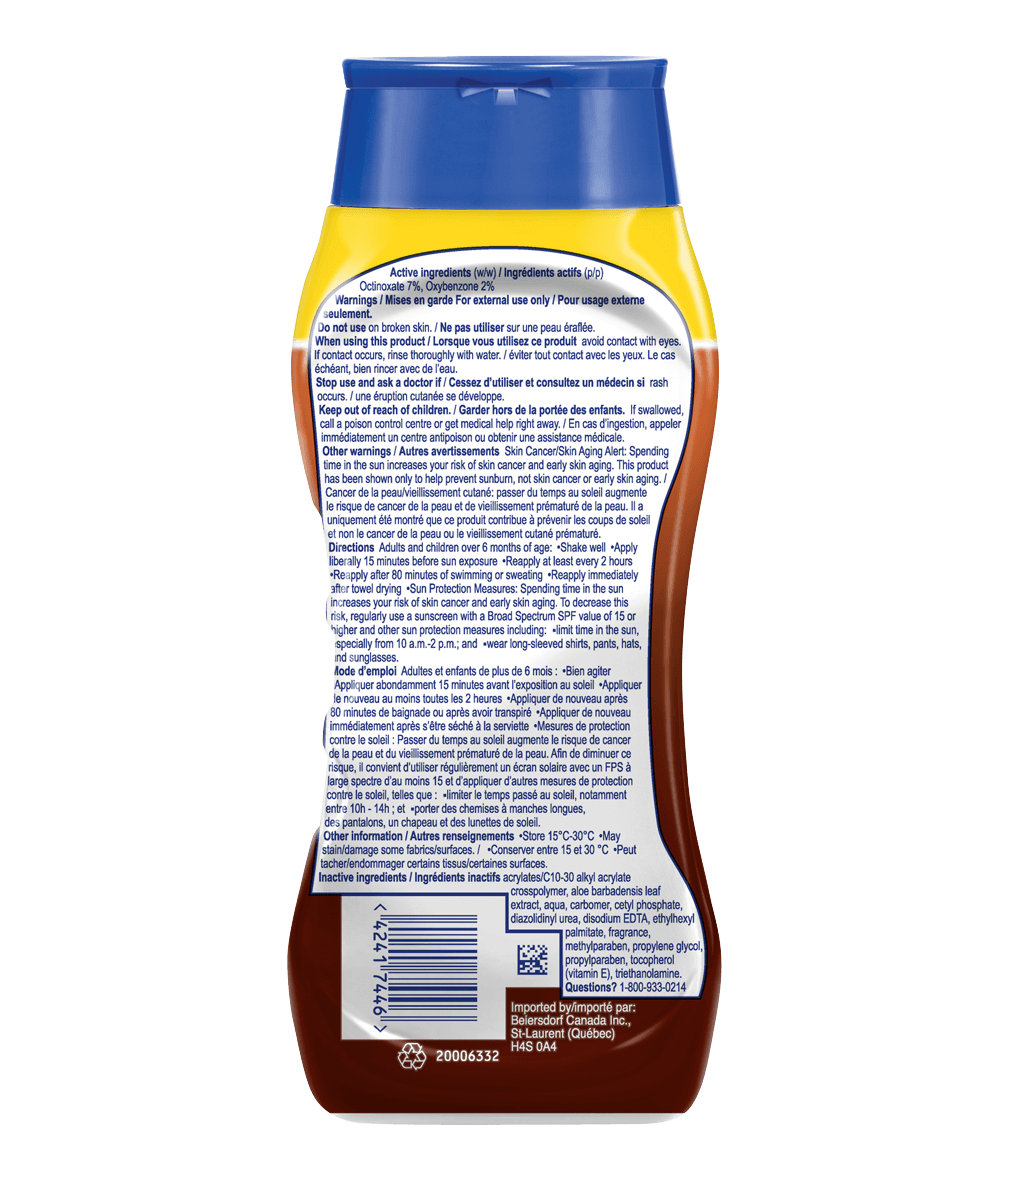 Coppertone® Tanning Sunscreen Lotion SPF8